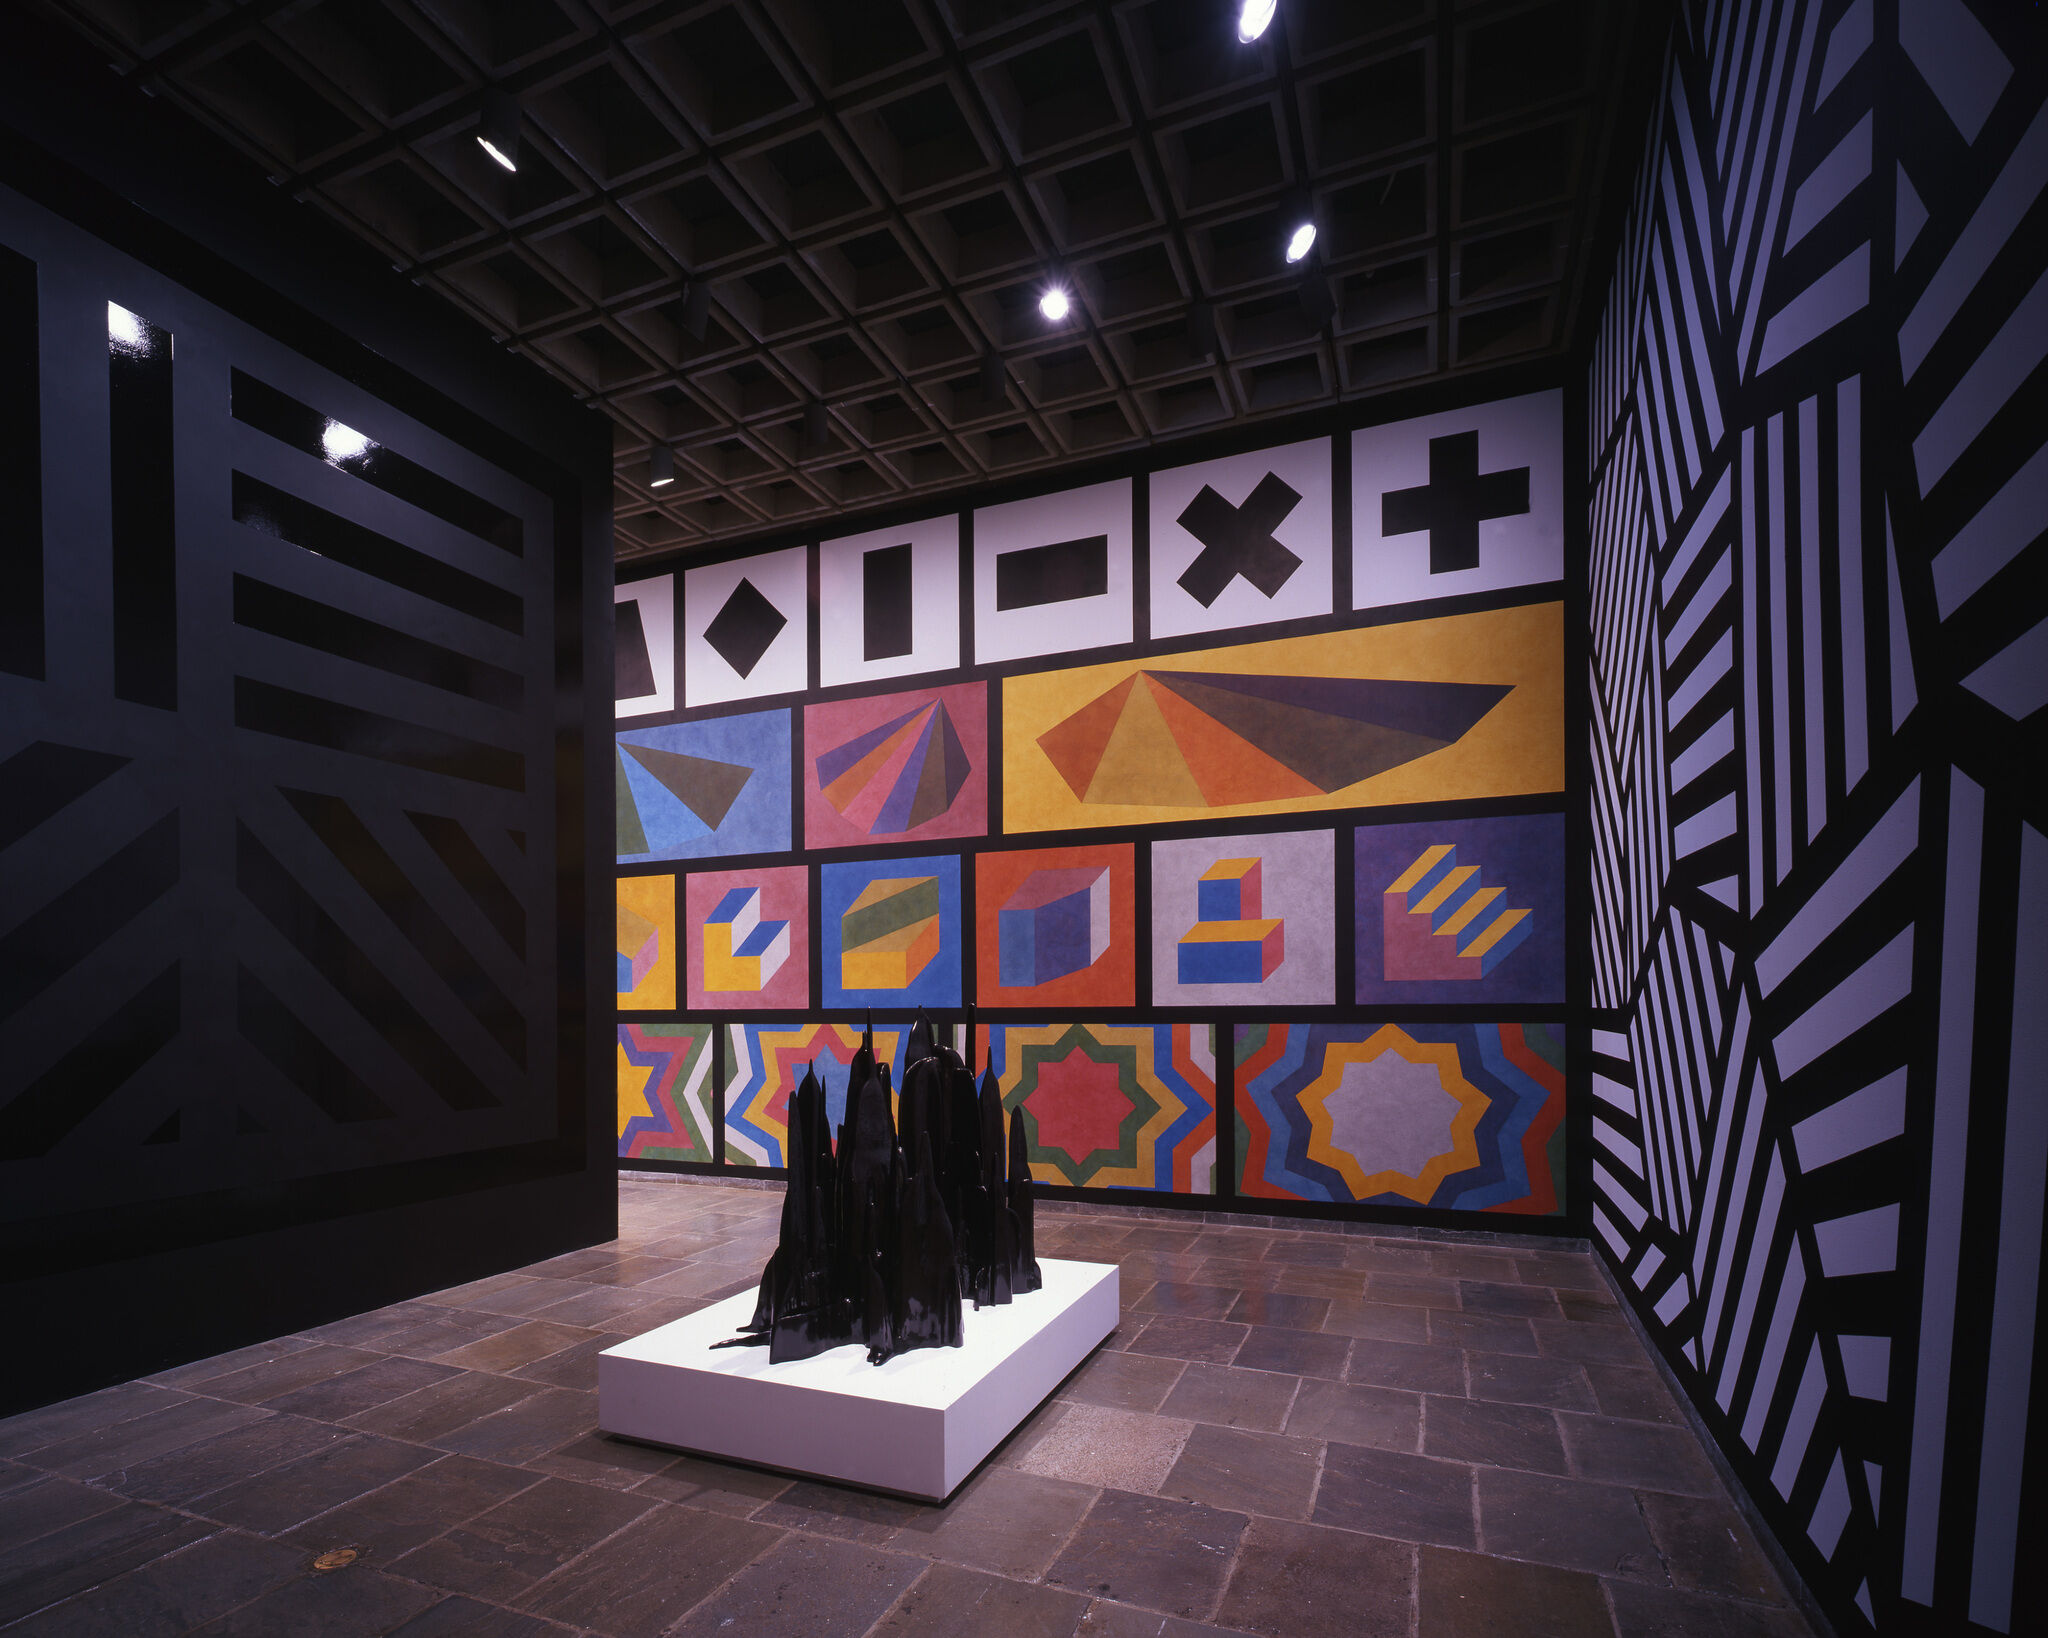 A gallery with two walls covered in black and white geometric patterns and another with colorful geometric figures, along with a black sculpture on display.